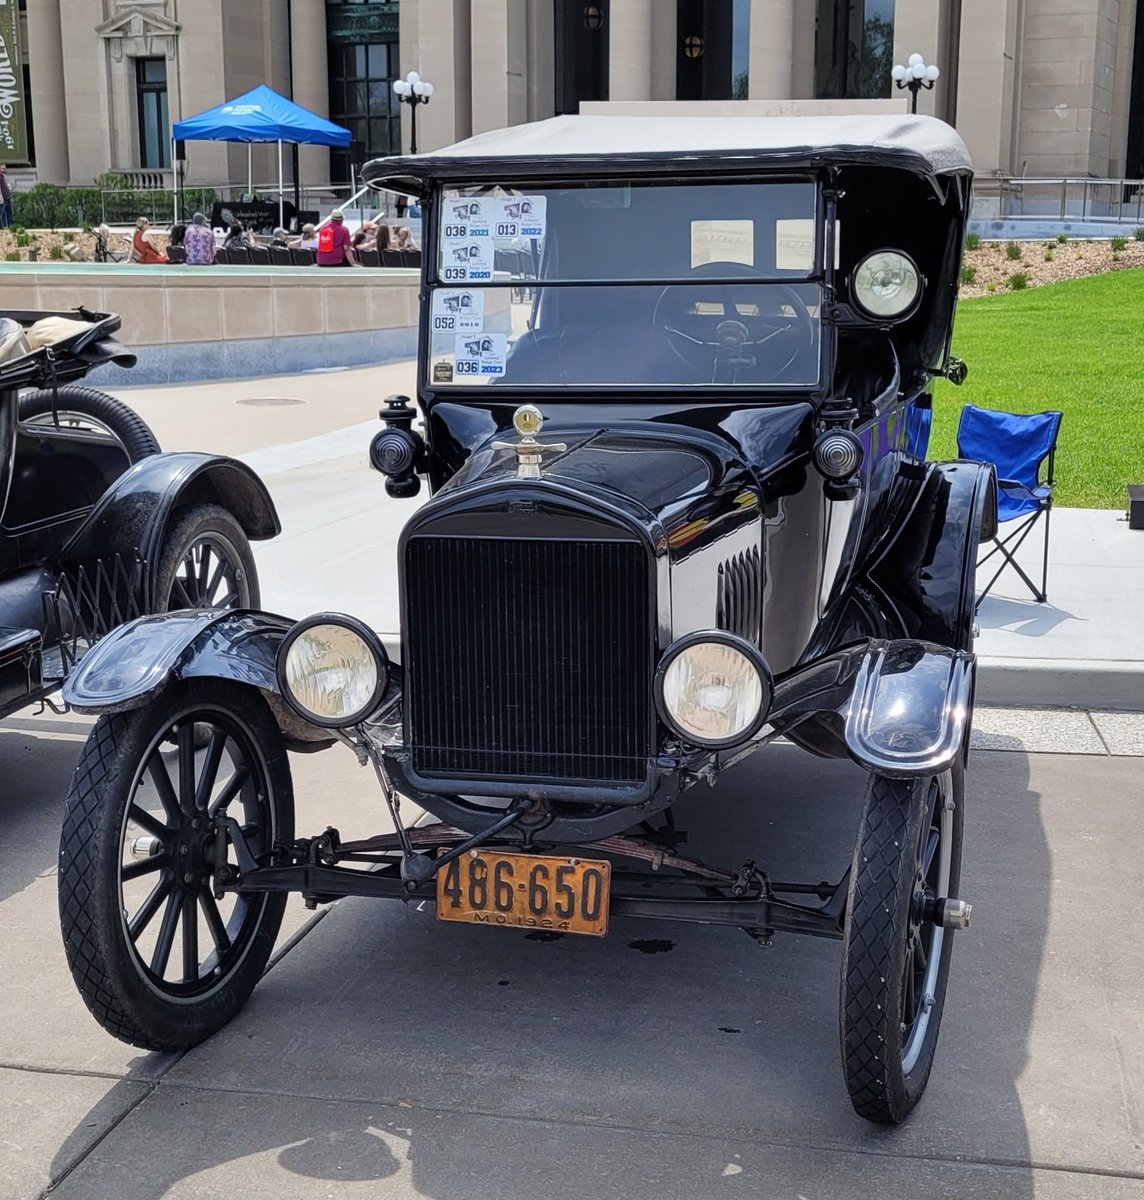 If I were driving to the 1904 World's Fair, I'd ride in style in one of these bad boys. @mohistorymuseum @ForestPark4Ever